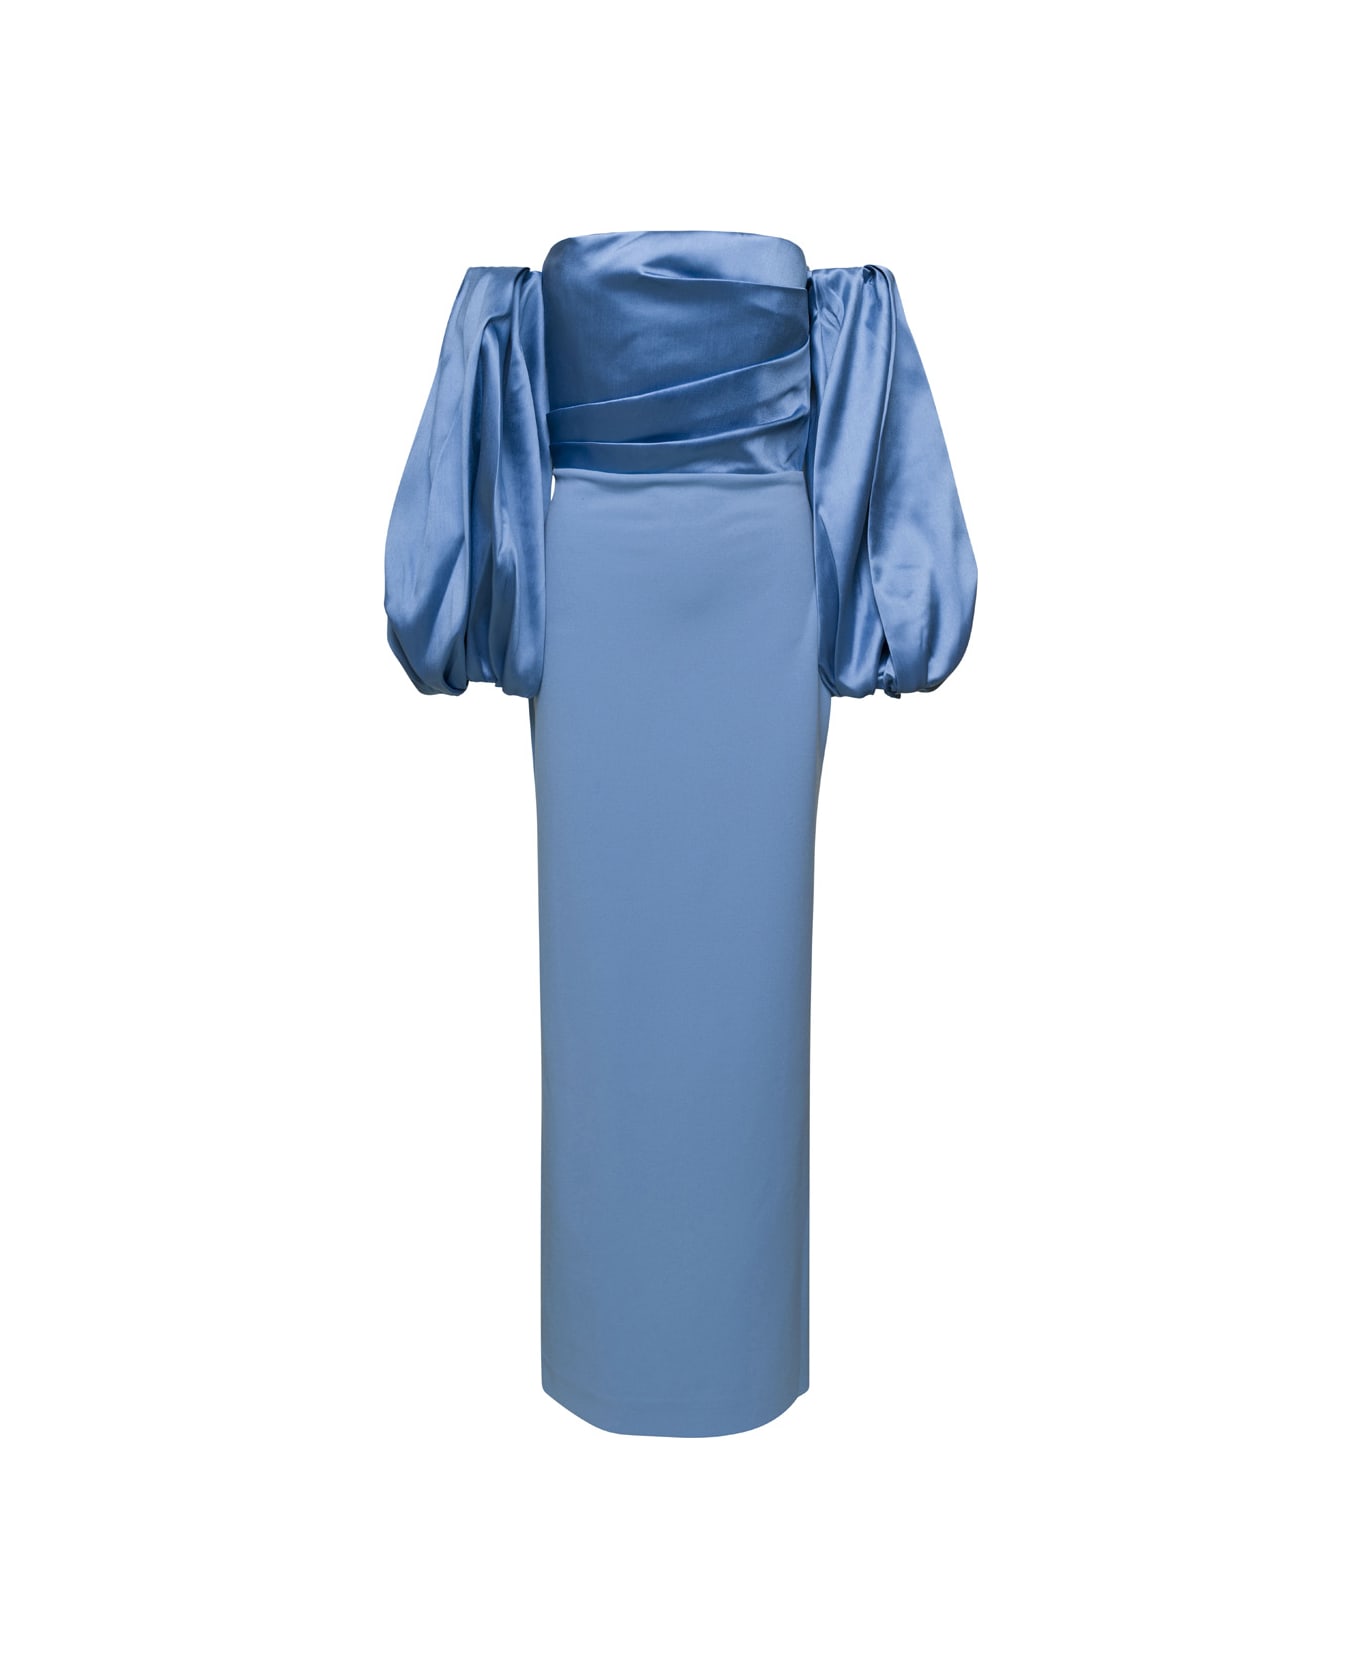 Solace London Light Blue Maxi Dress With Puffed Sleeves In Techno Fabric Woman - Gnawed Blue